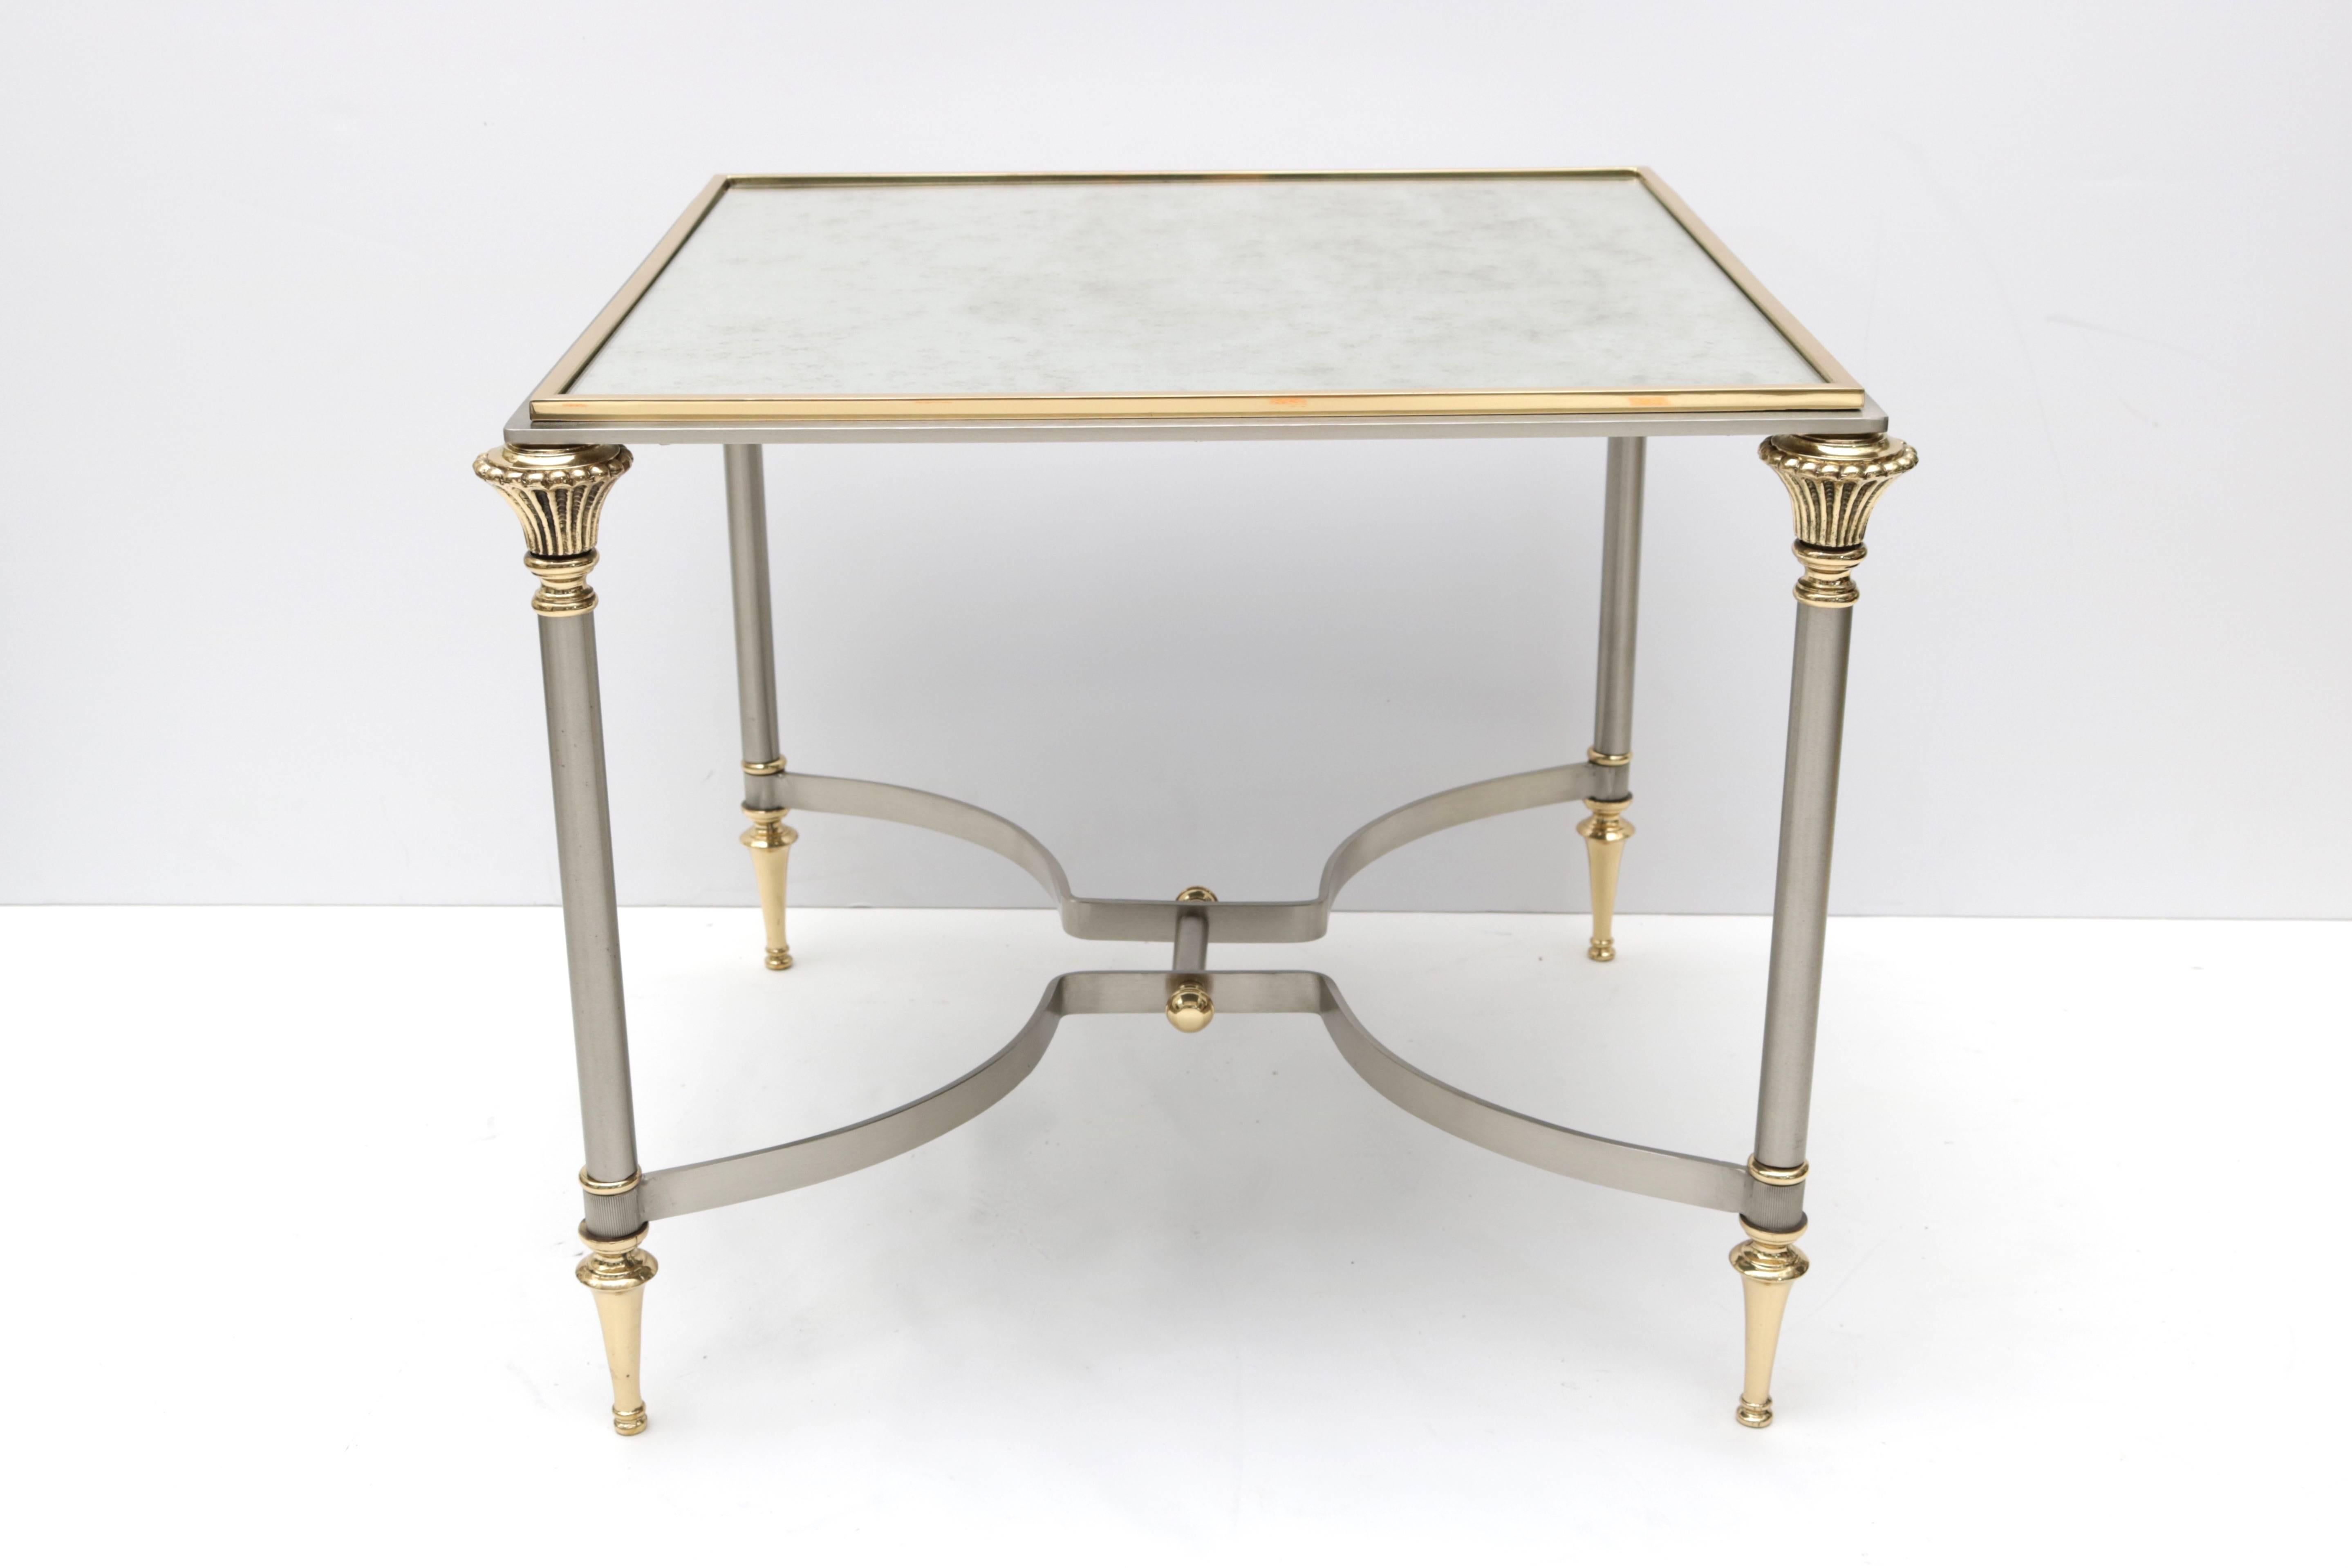 This stylish side table with its Louis XVI lines is very much in the style of pieces created by Maison Jansen. The combination of brass and satin steel blend beautifully with all interiors.

Note: This piece has been professionally polished.

Note: